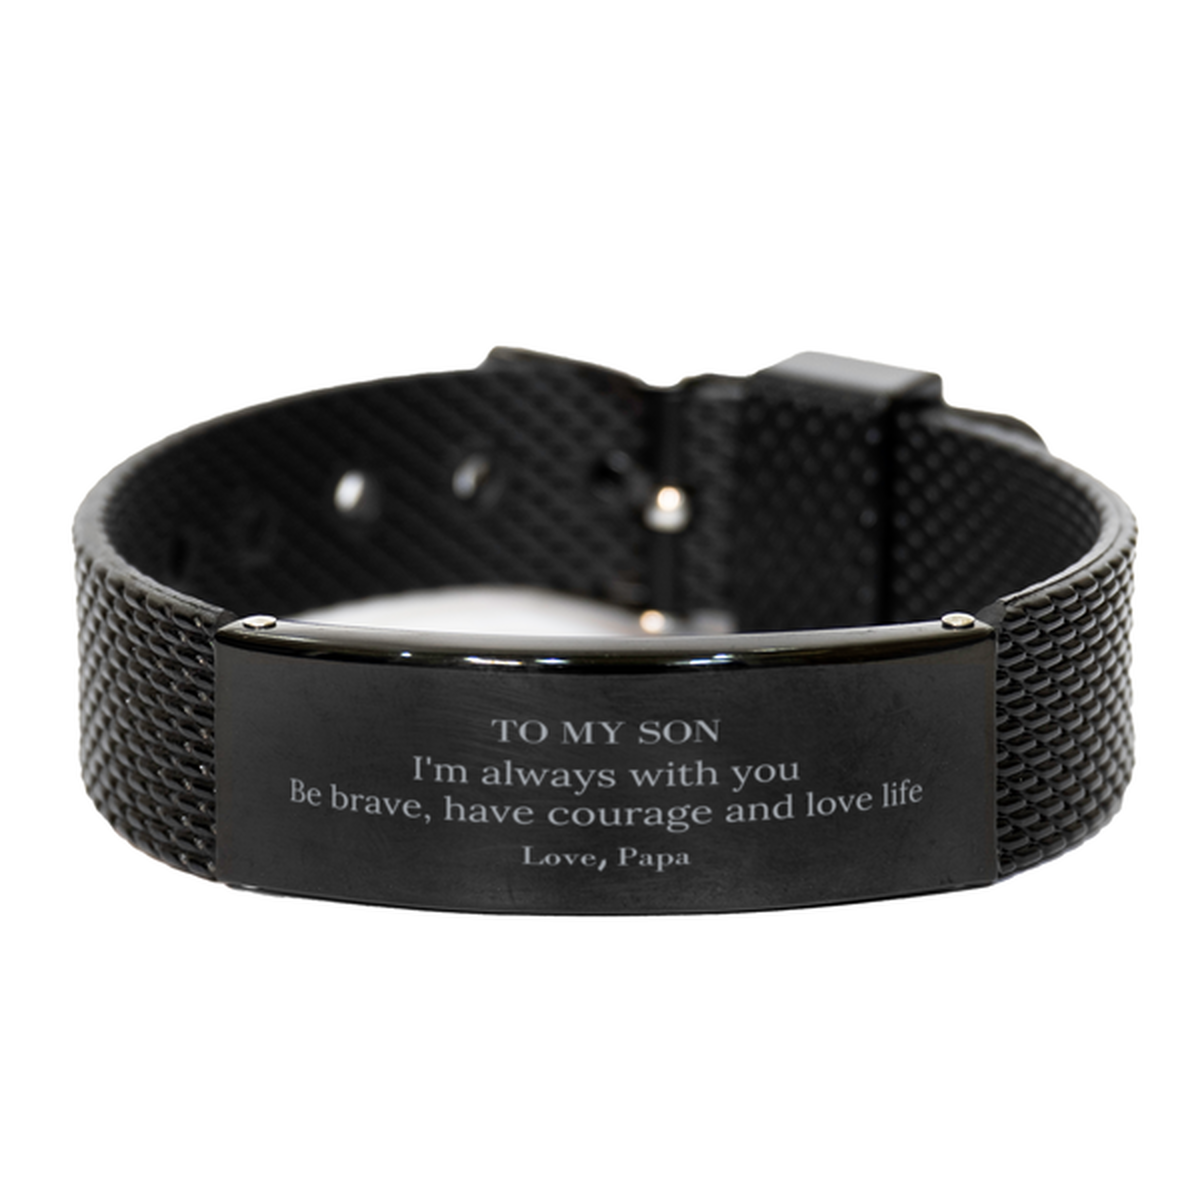 To My Son Gifts from Papa, Unique Black Shark Mesh Bracelet Inspirational Christmas Birthday Graduation Gifts for Son I'm always with you. Be brave, have courage and love life. Love, Papa